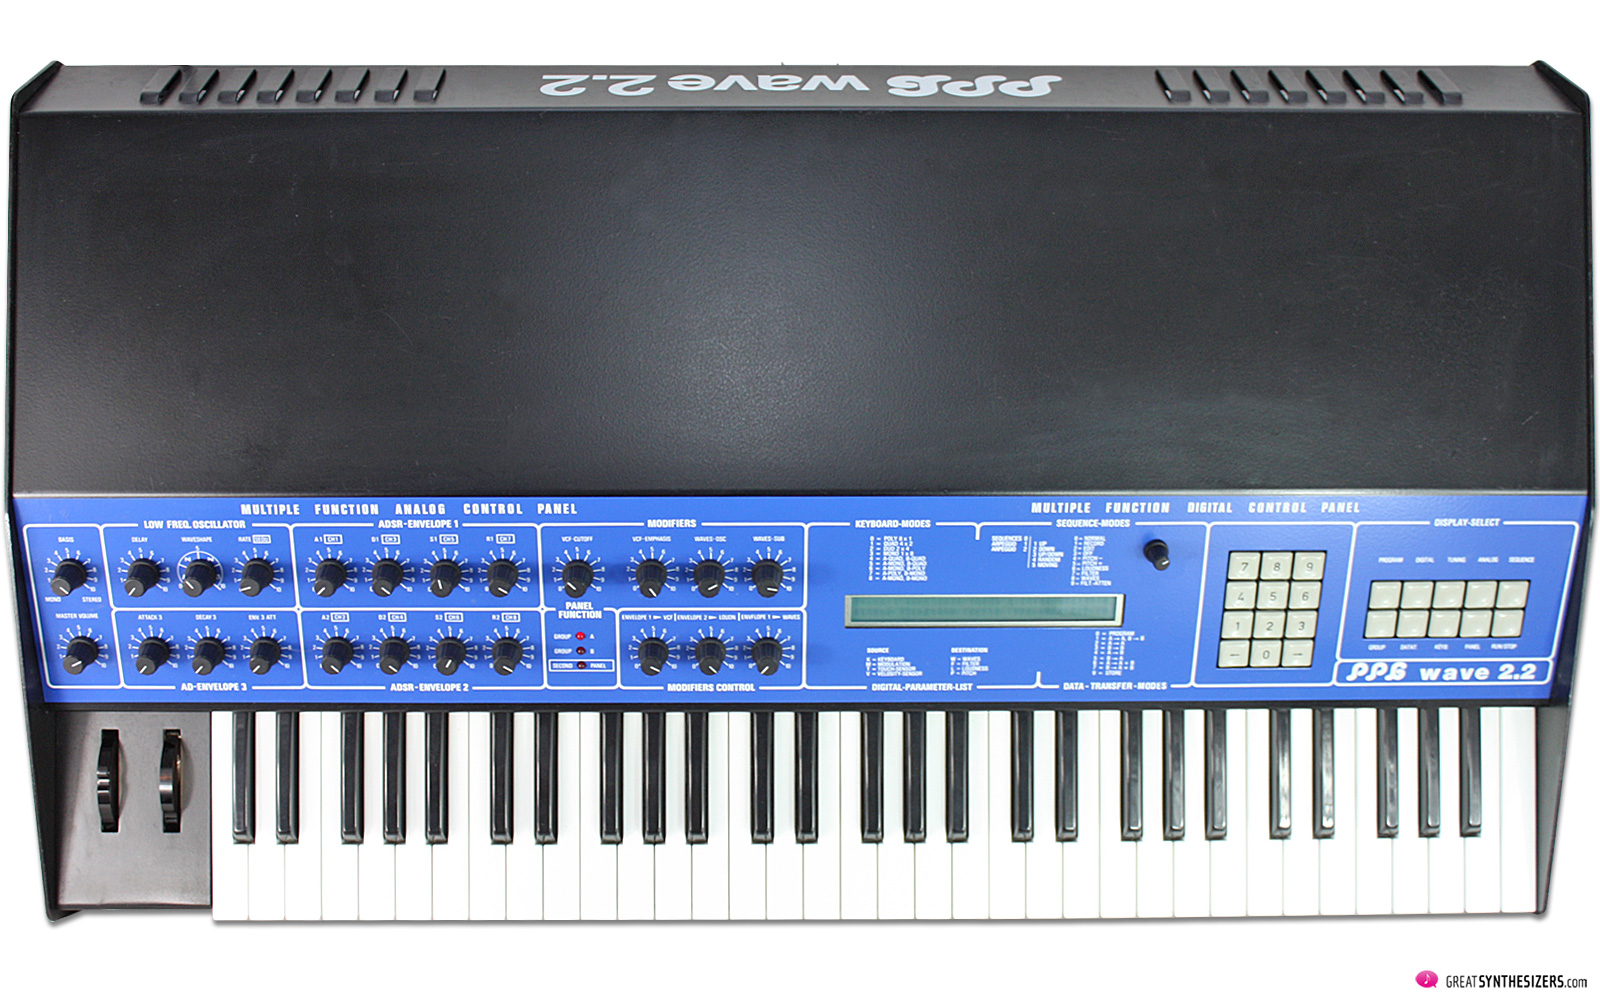 PPG-Wave-2-2-Synthesizer-03-1.jpg